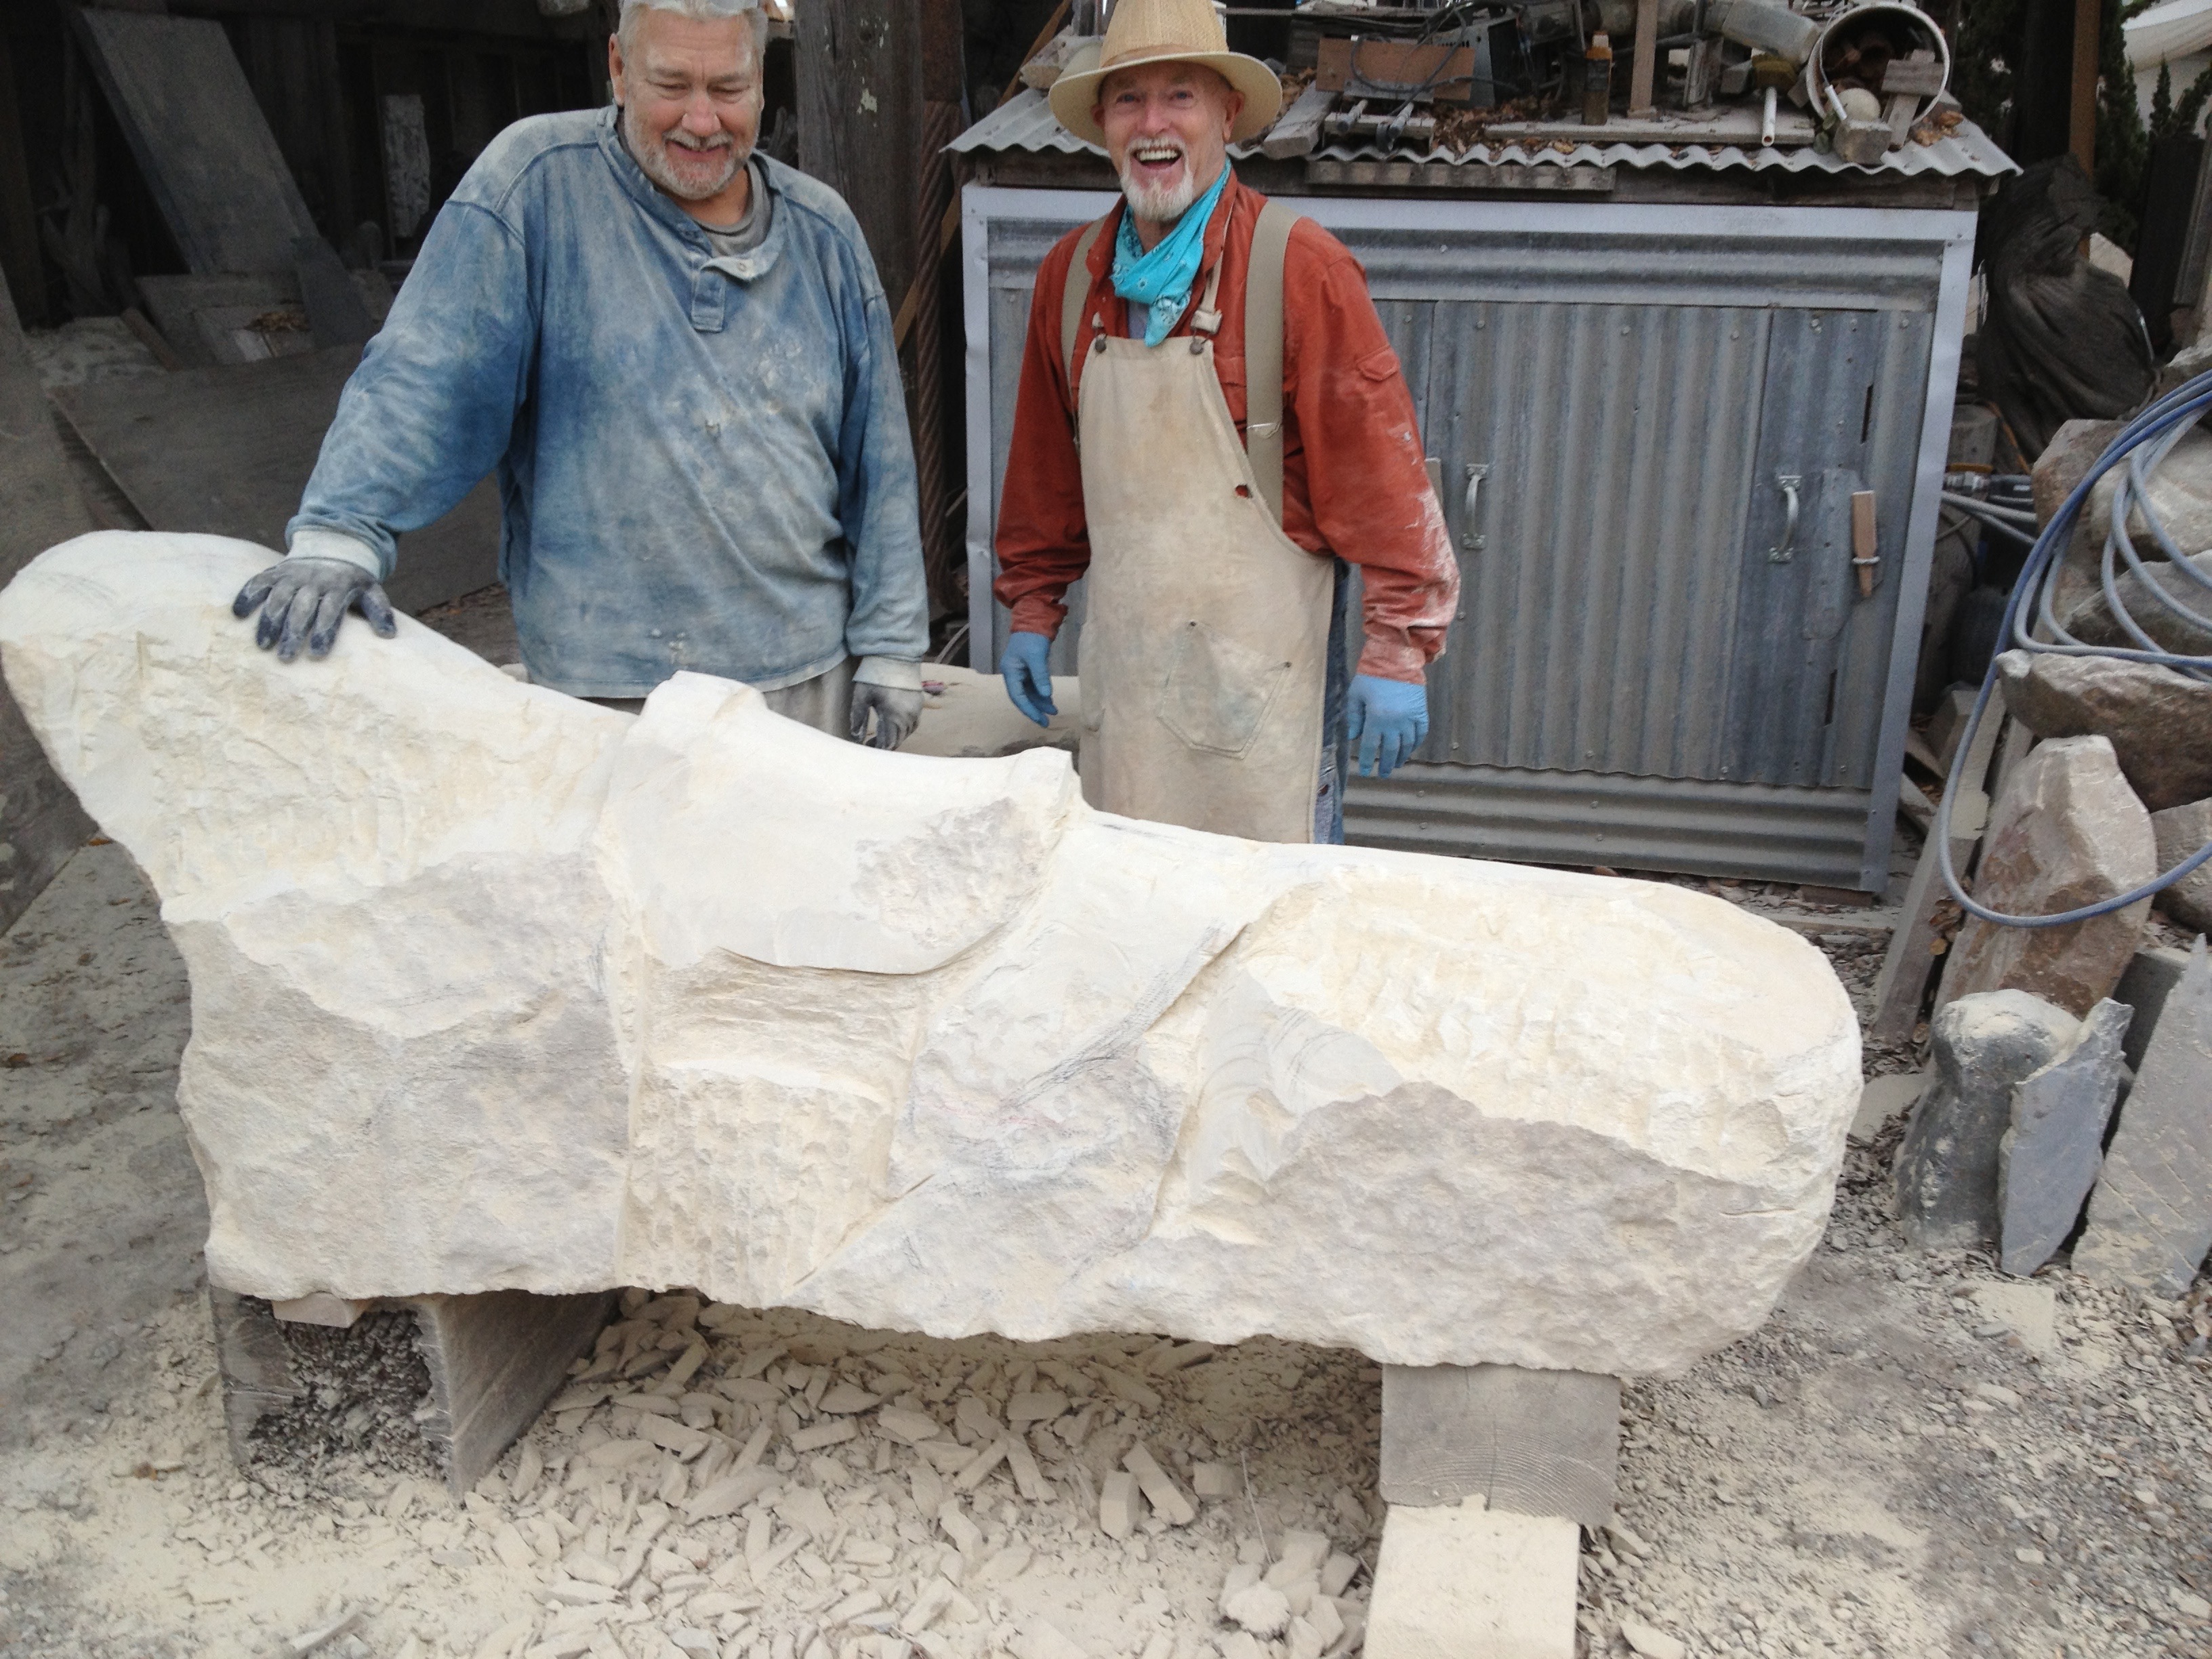 Jim Heltsley & Duane O'Connor at an early stage of carving the Lizard.